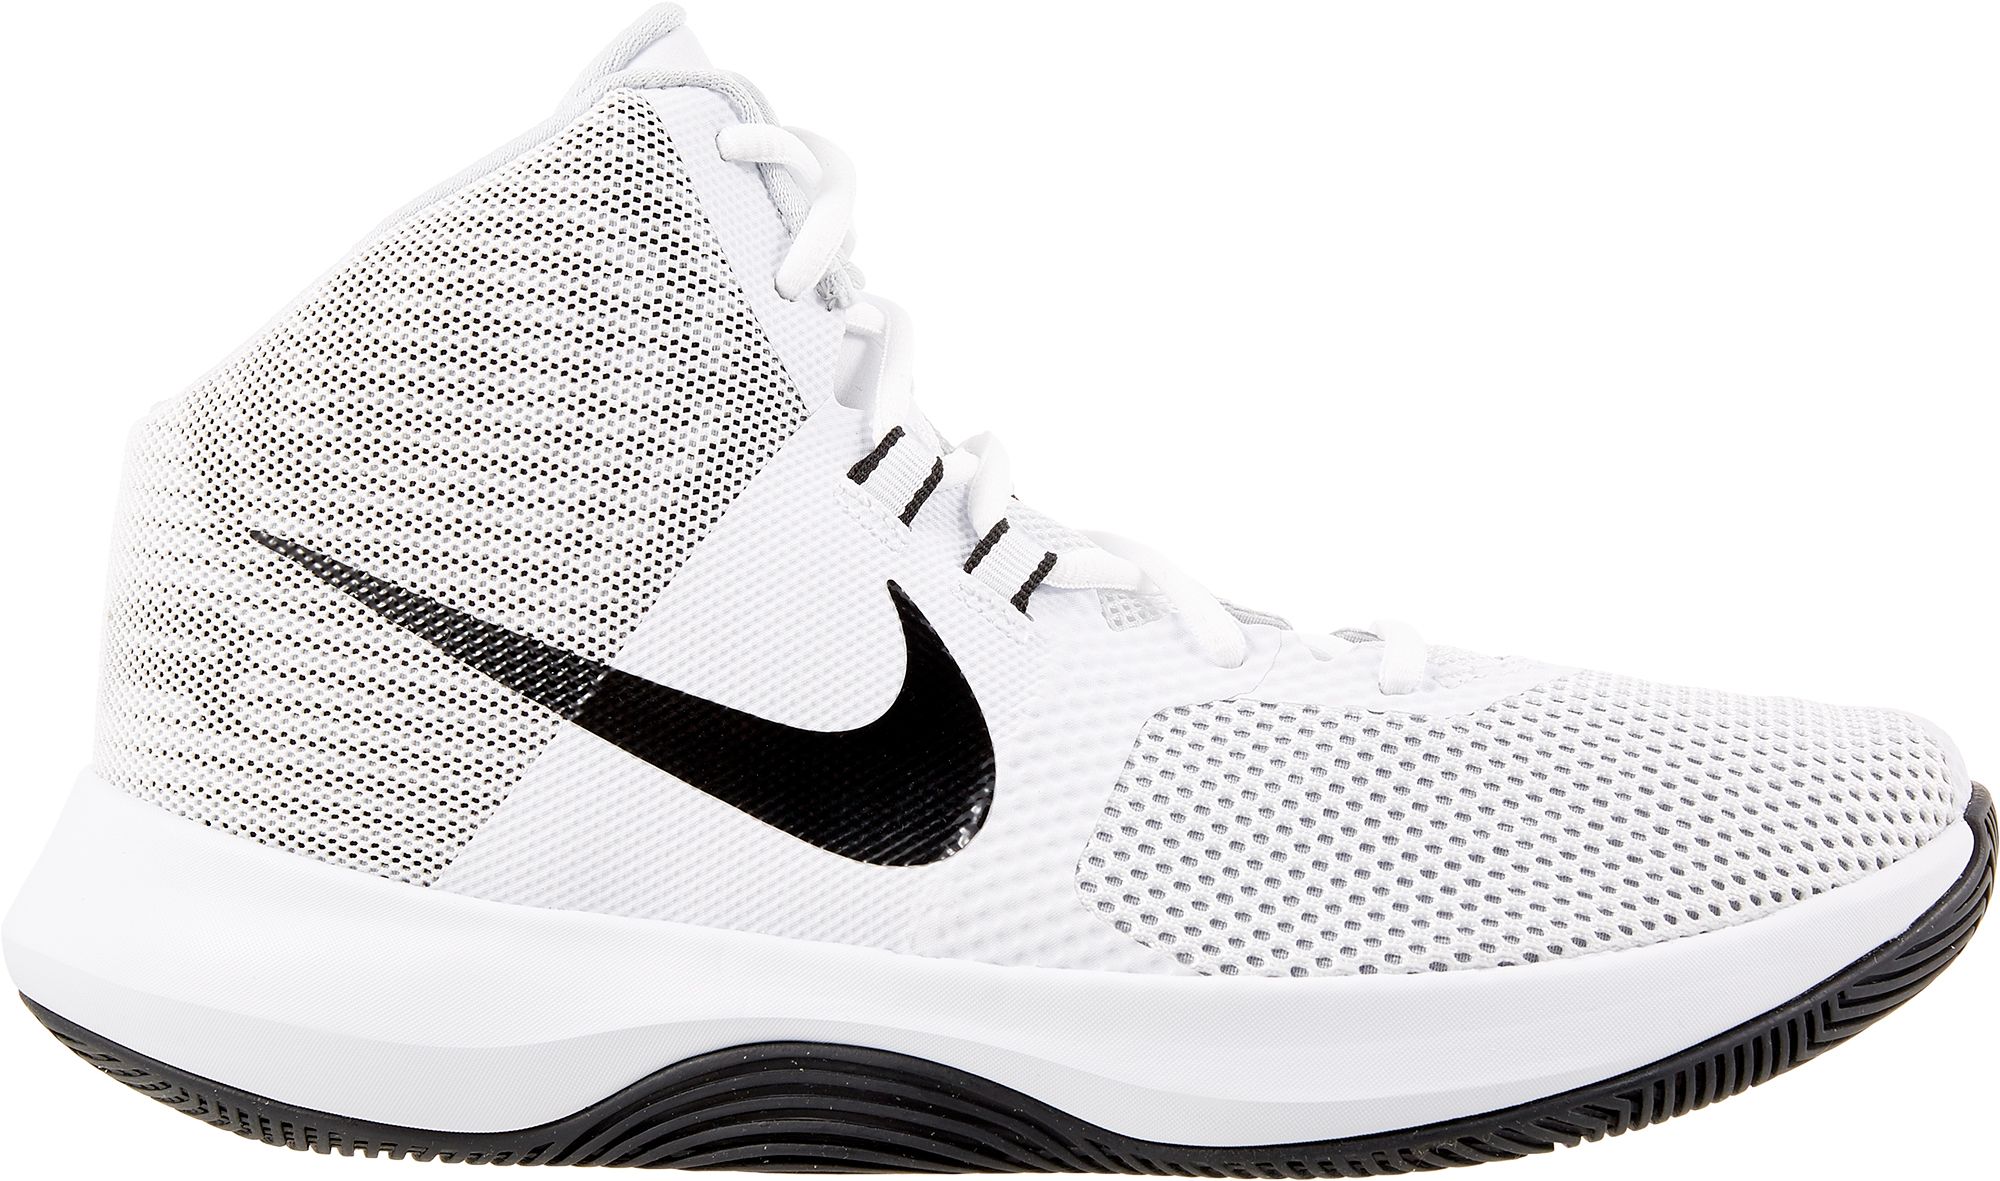 mens nike basketball shoes under $50